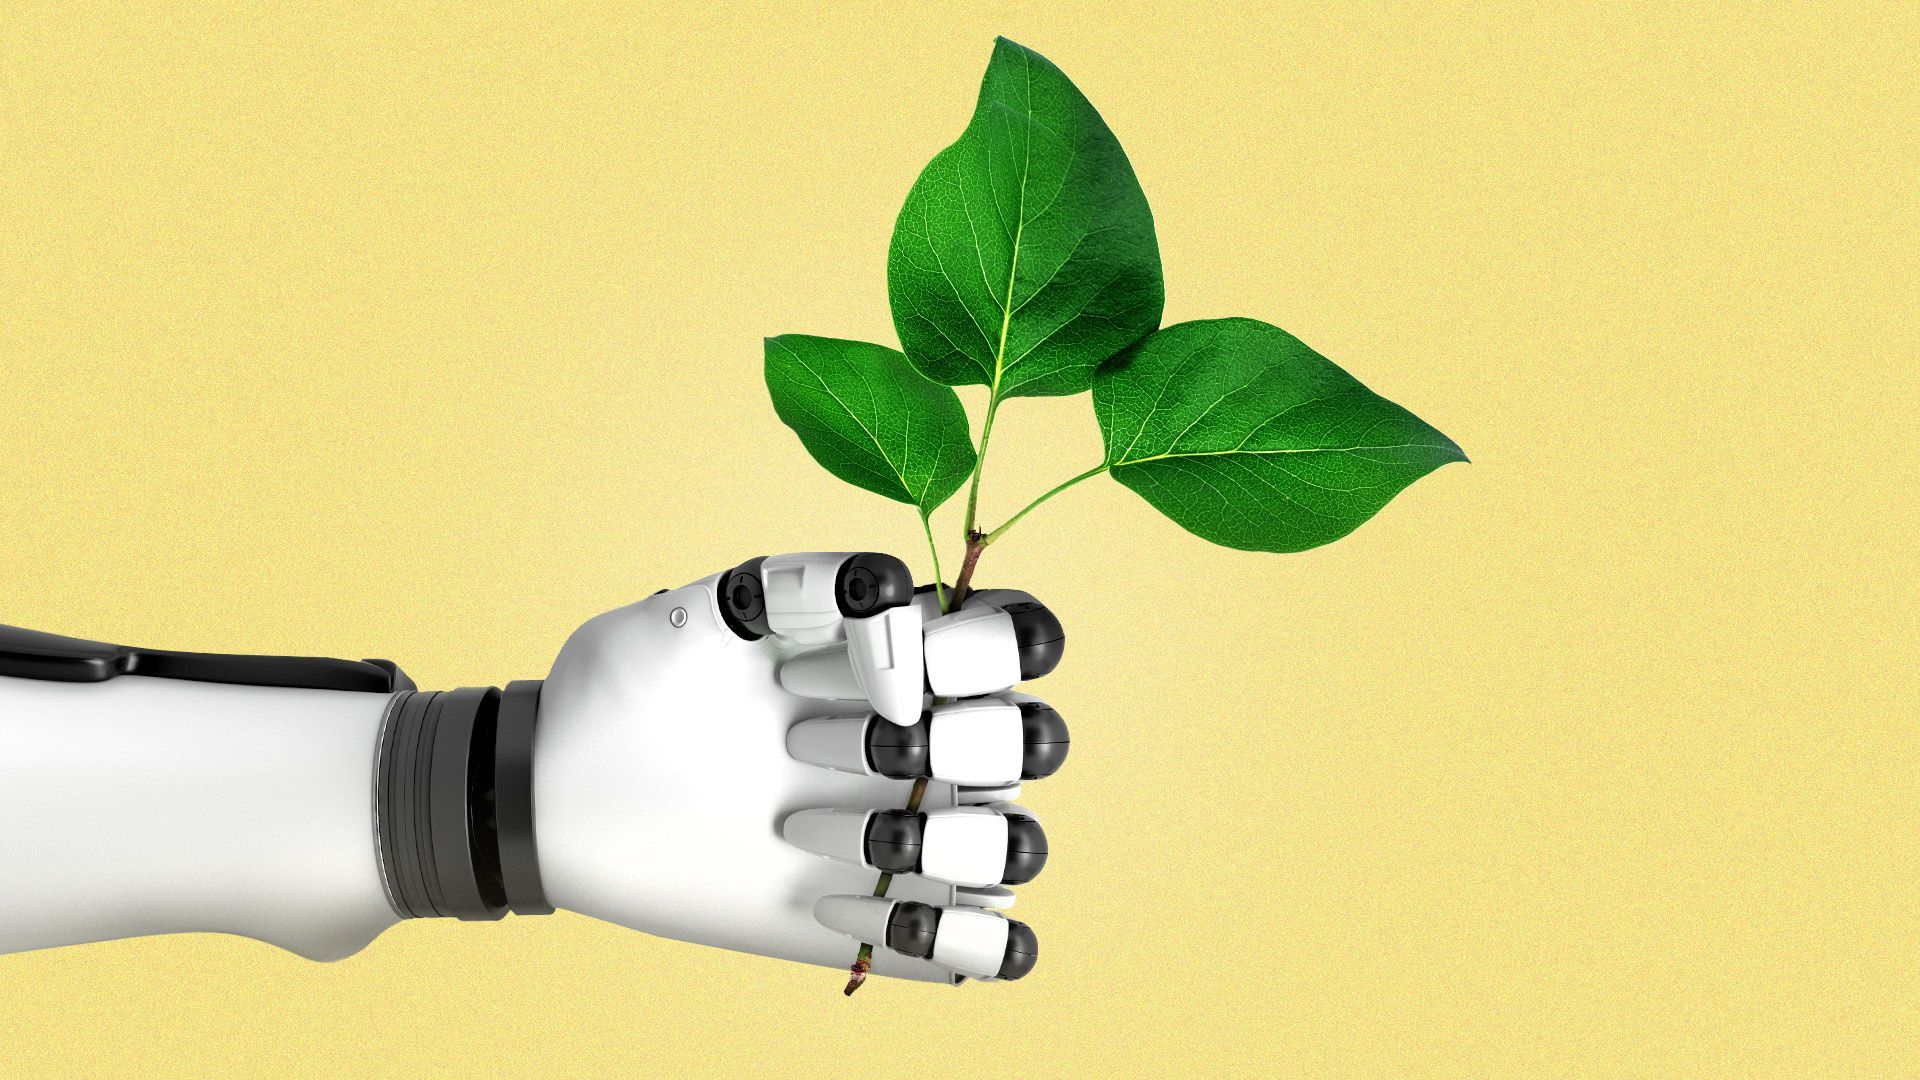 an illustration of a robot hand holding a stem of green leaves